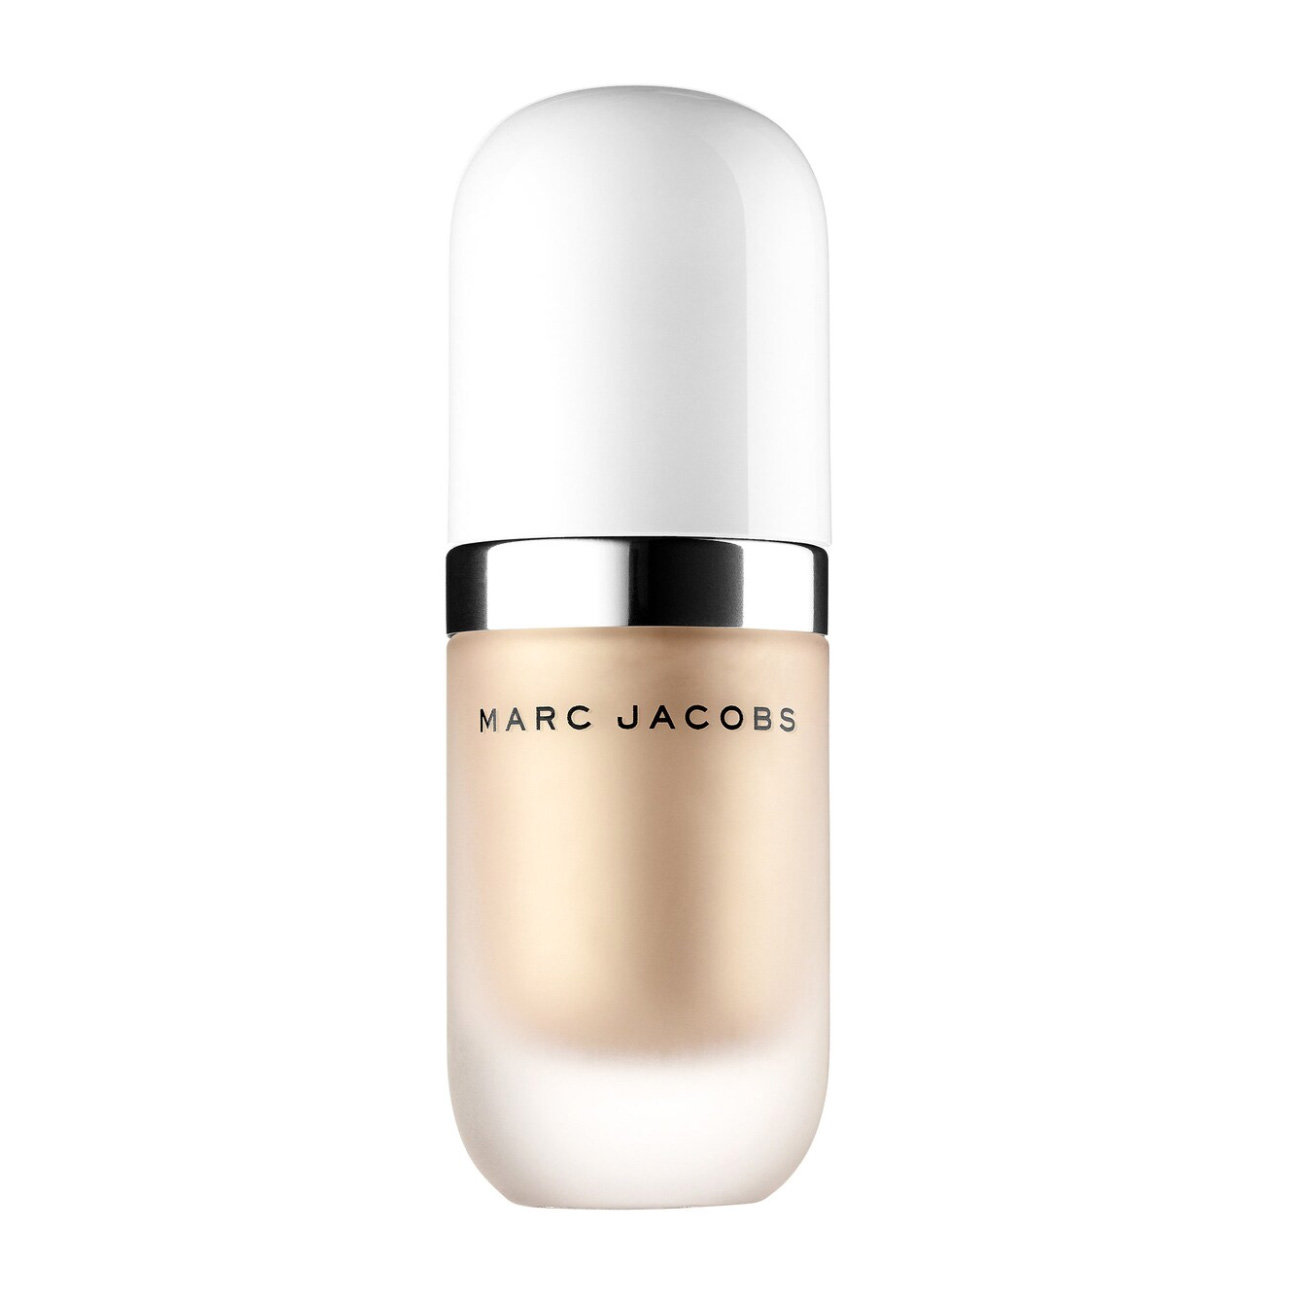 Marc Jacobs Beauty Dew Drops Coconut Gel Highlighter best highlighters